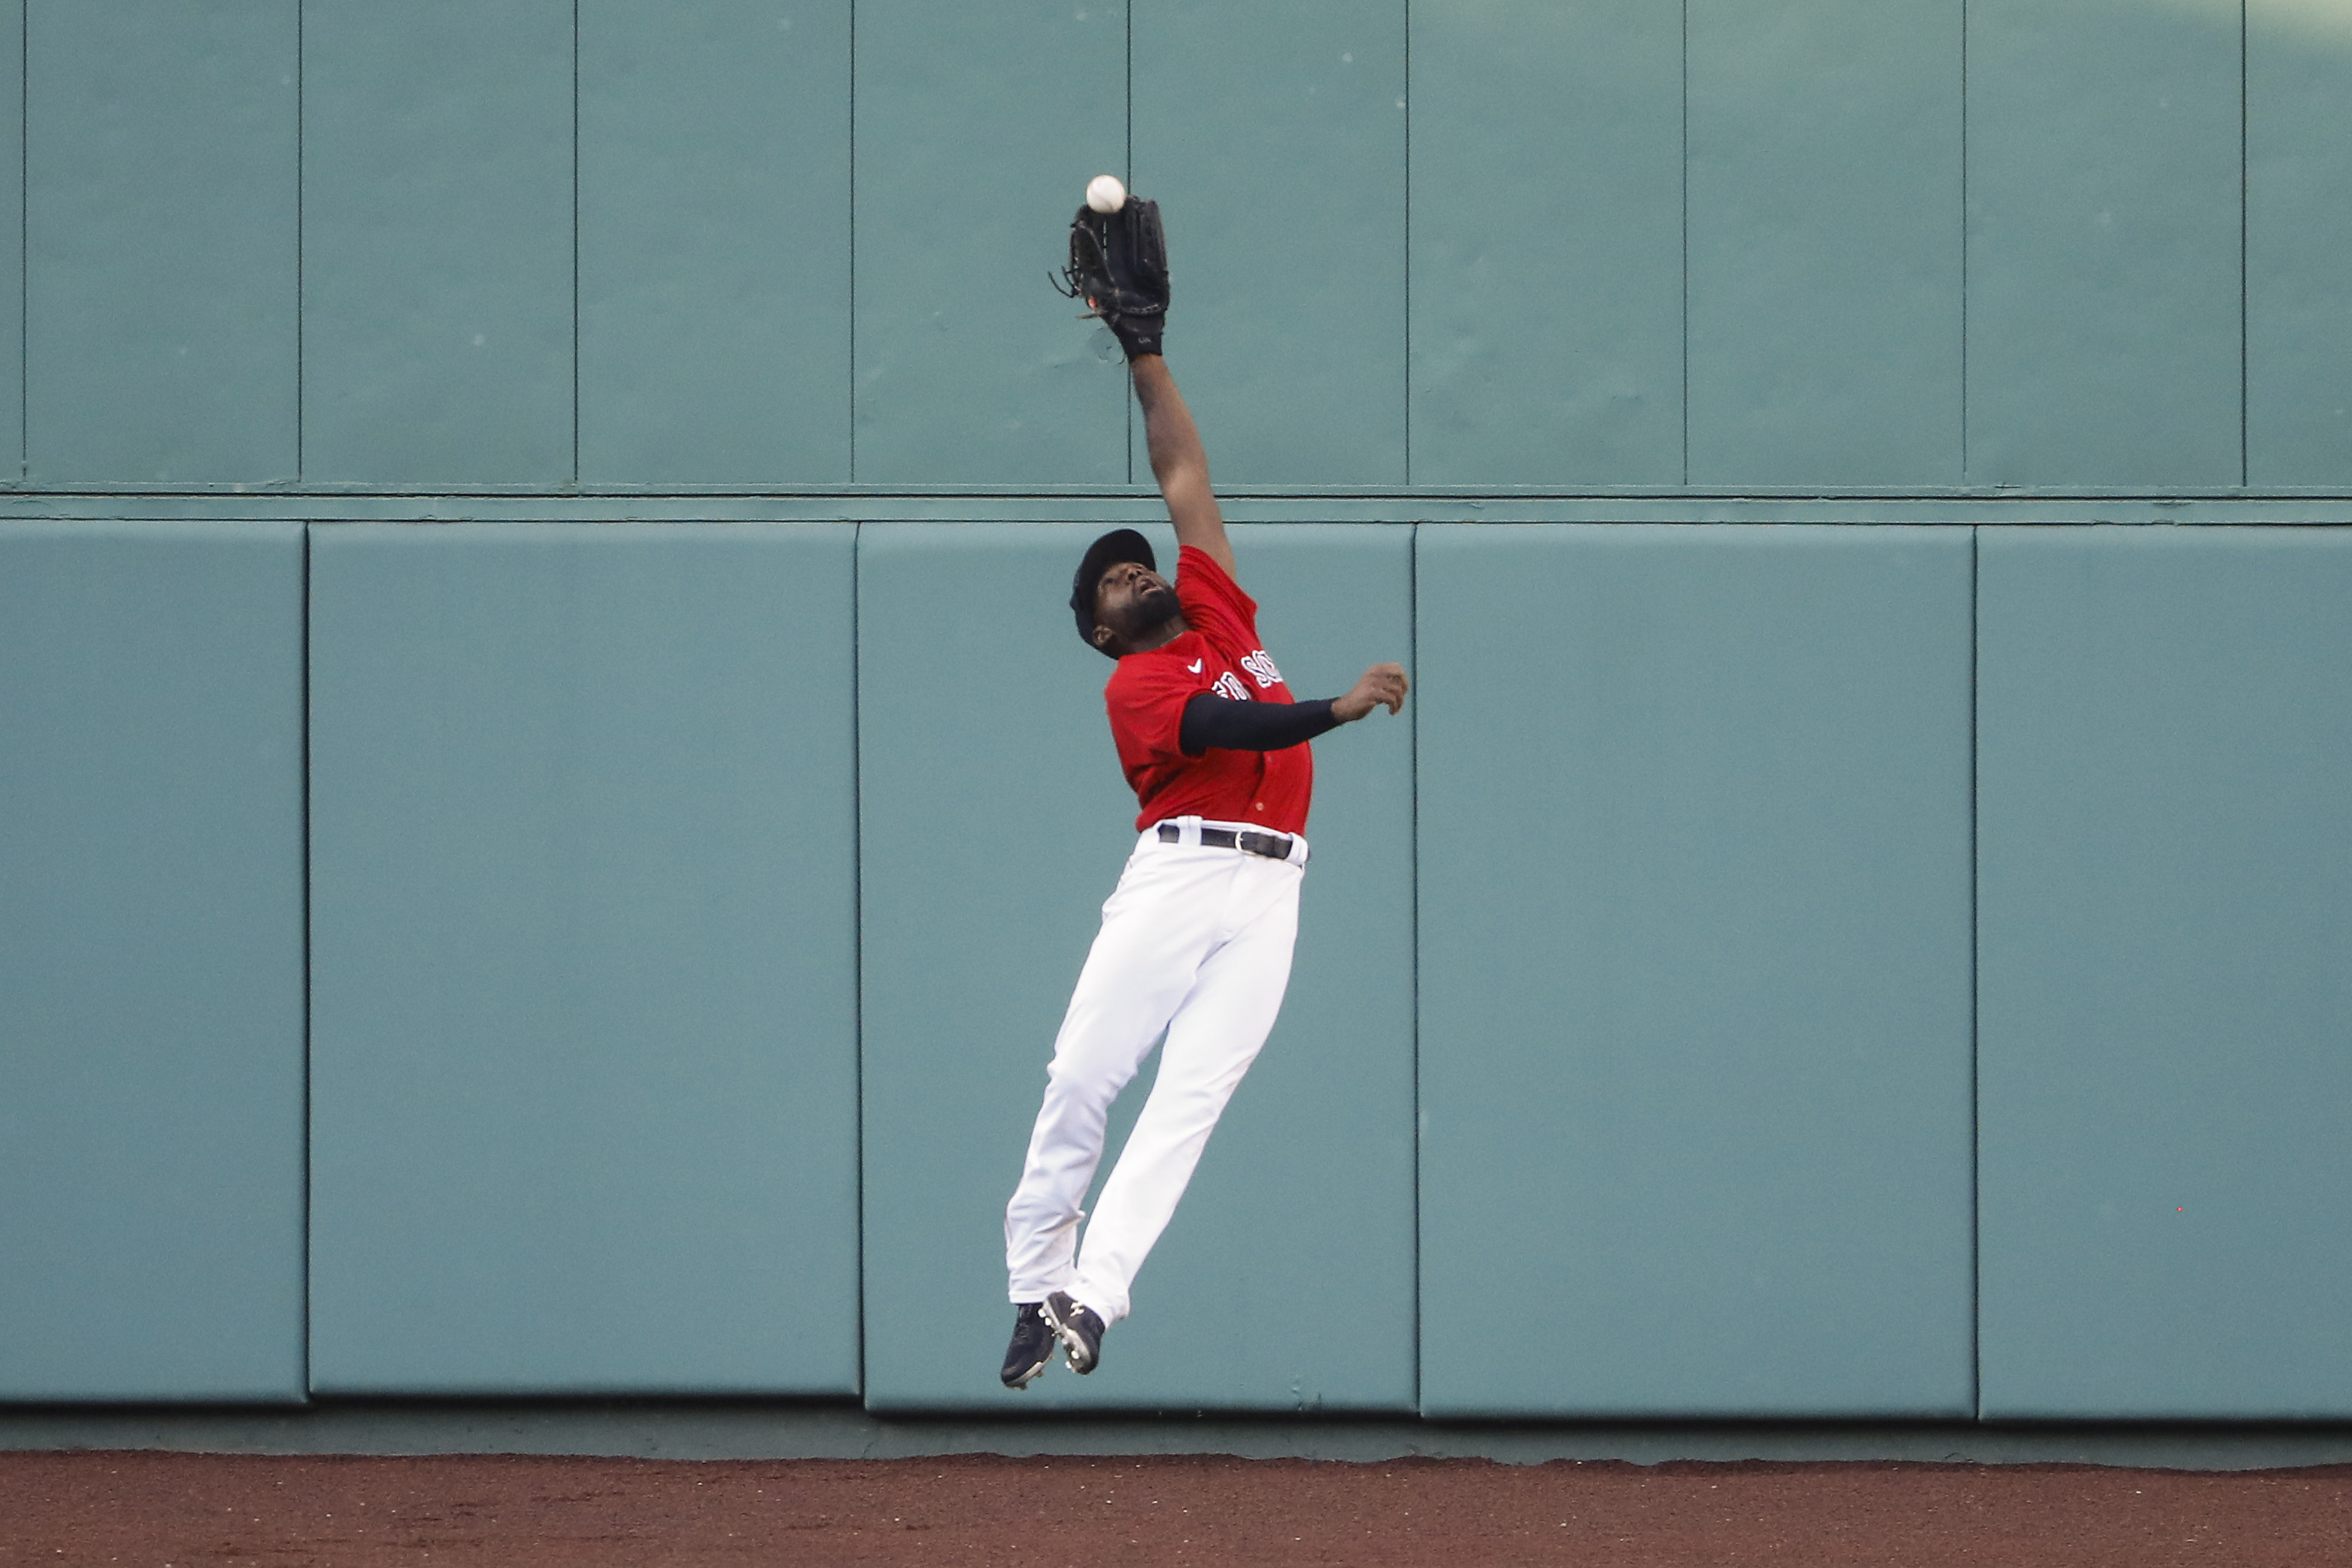 Blue Jays sign Jackie Bradley Jr. to 1-year deal